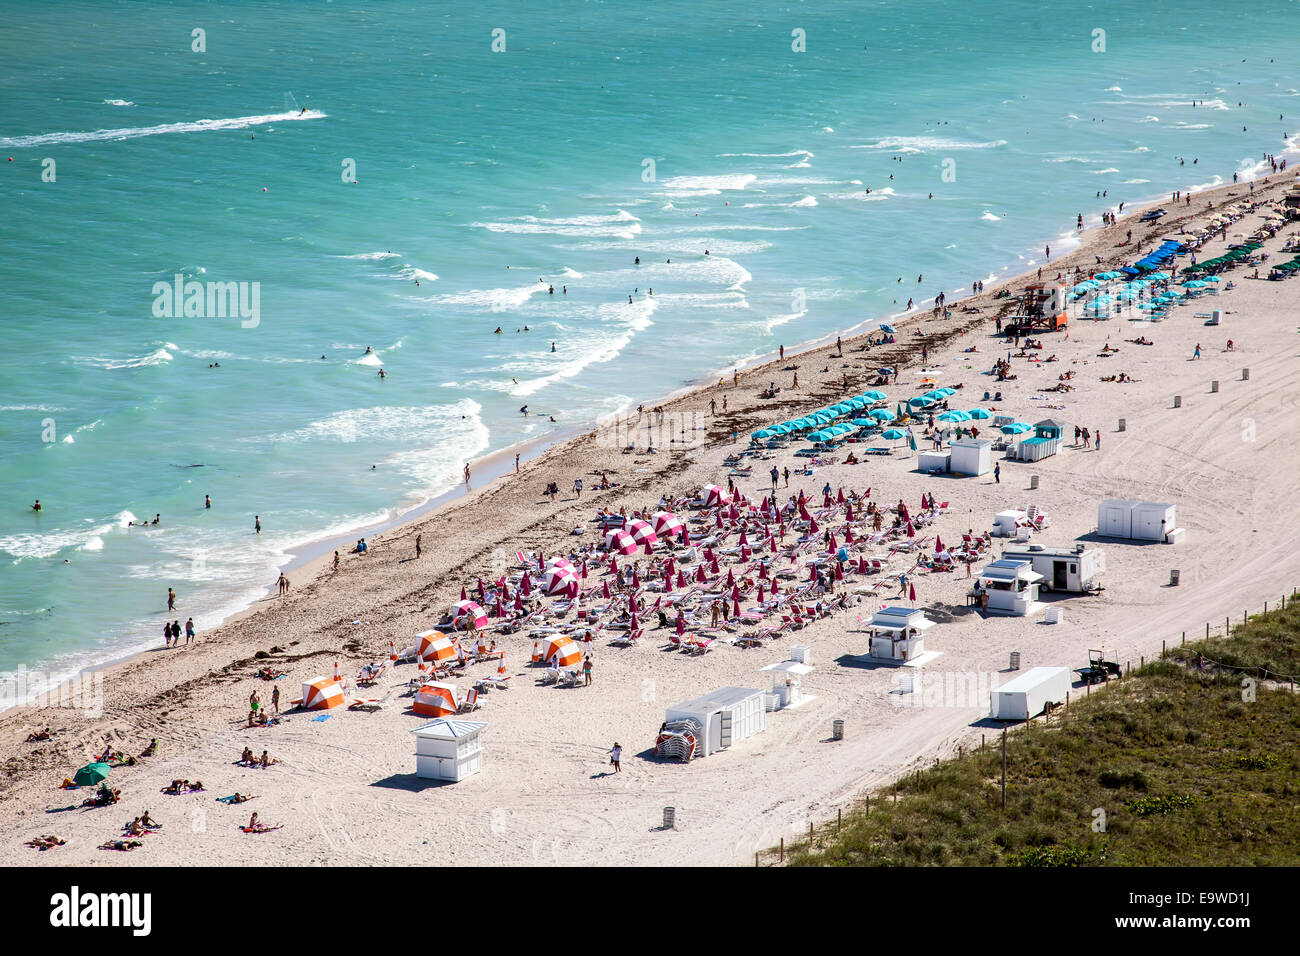 Aerial view of sunbathers, swimmers, surf and cabanas along South Beach, Miami Beach, Florida, USA. Stock Photo